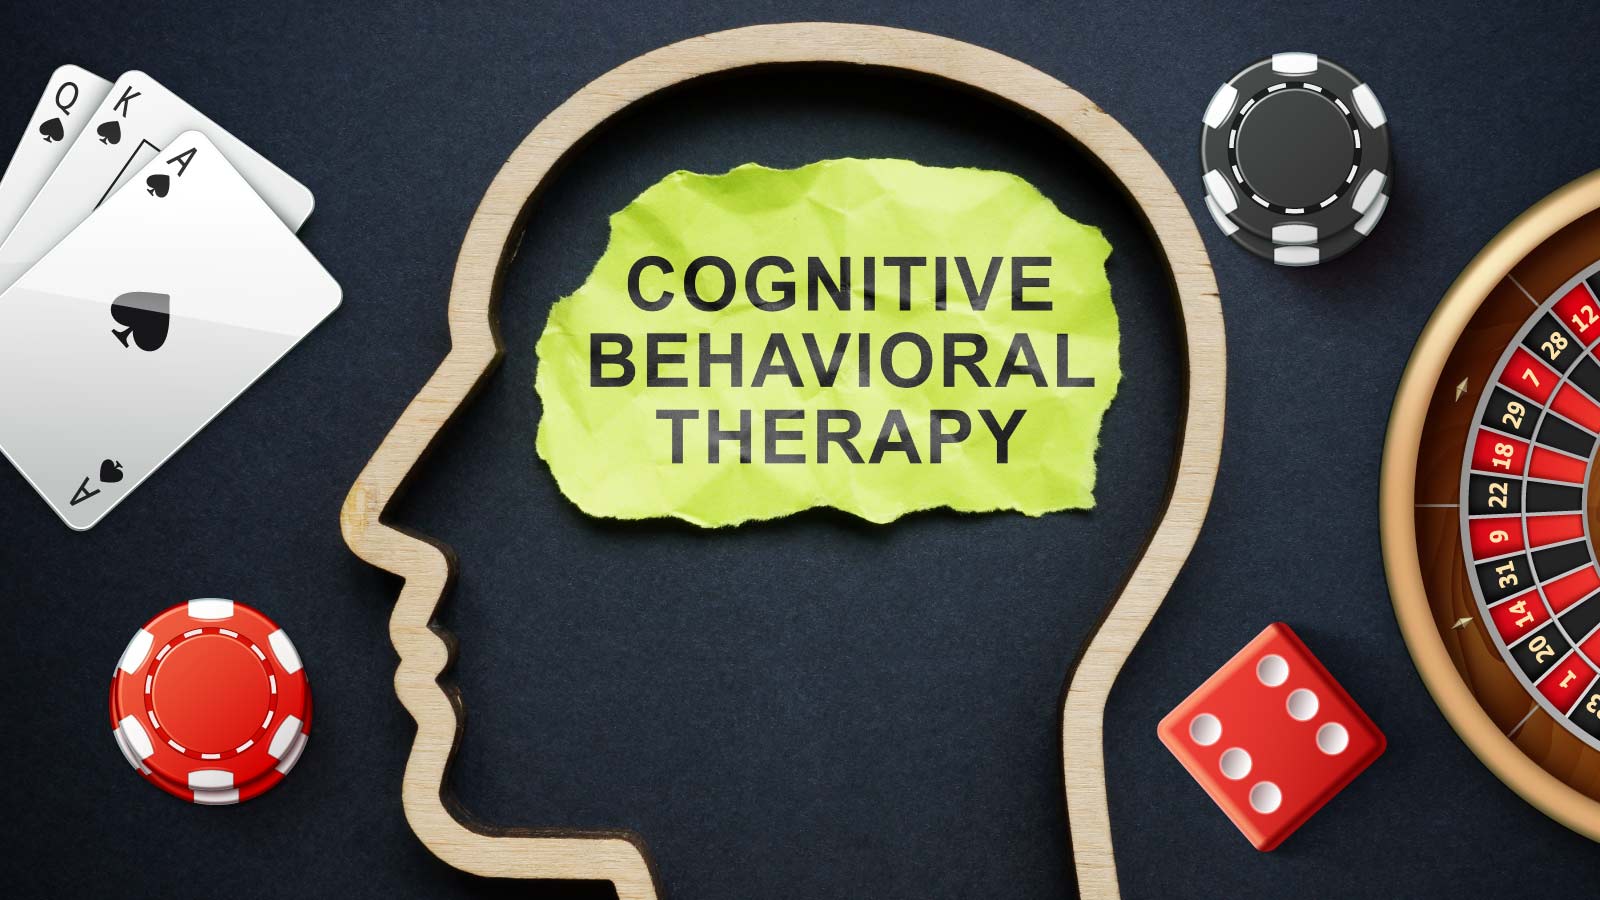 How Beneficial is Cognitive Behavioral Therapy for Compulsive Gambling Addiction